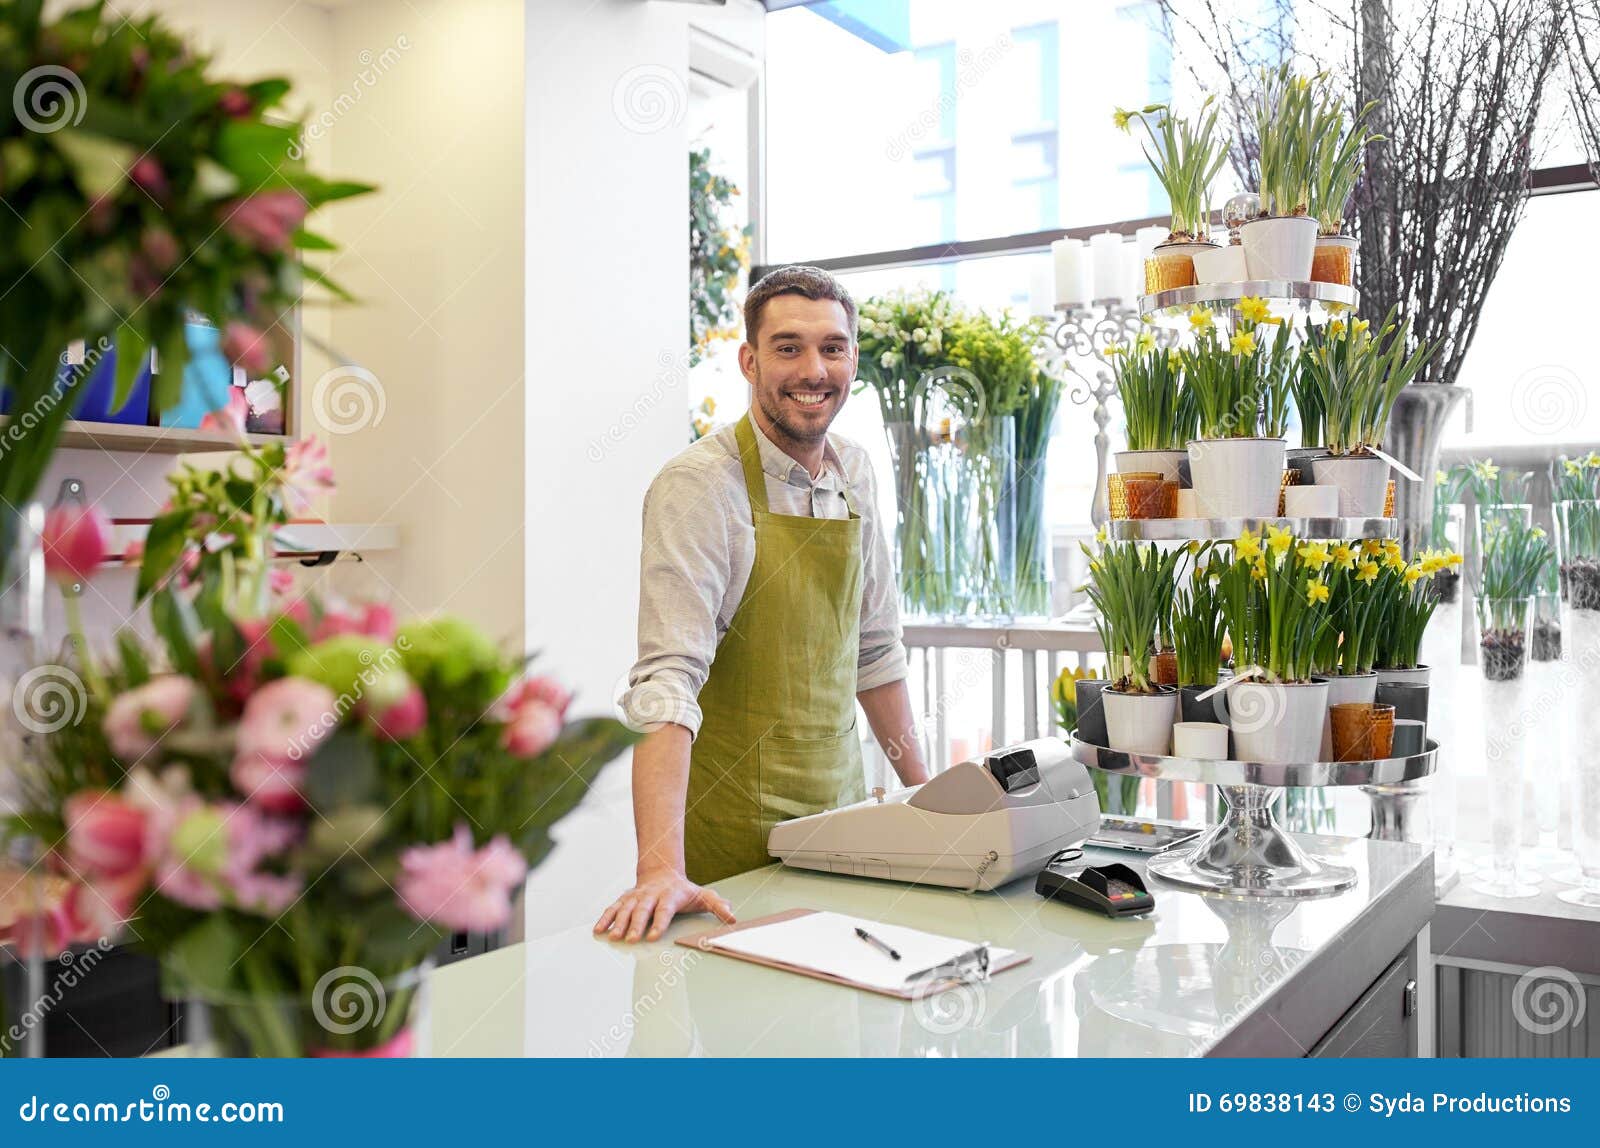 florist man with clipboard at flower shop counter